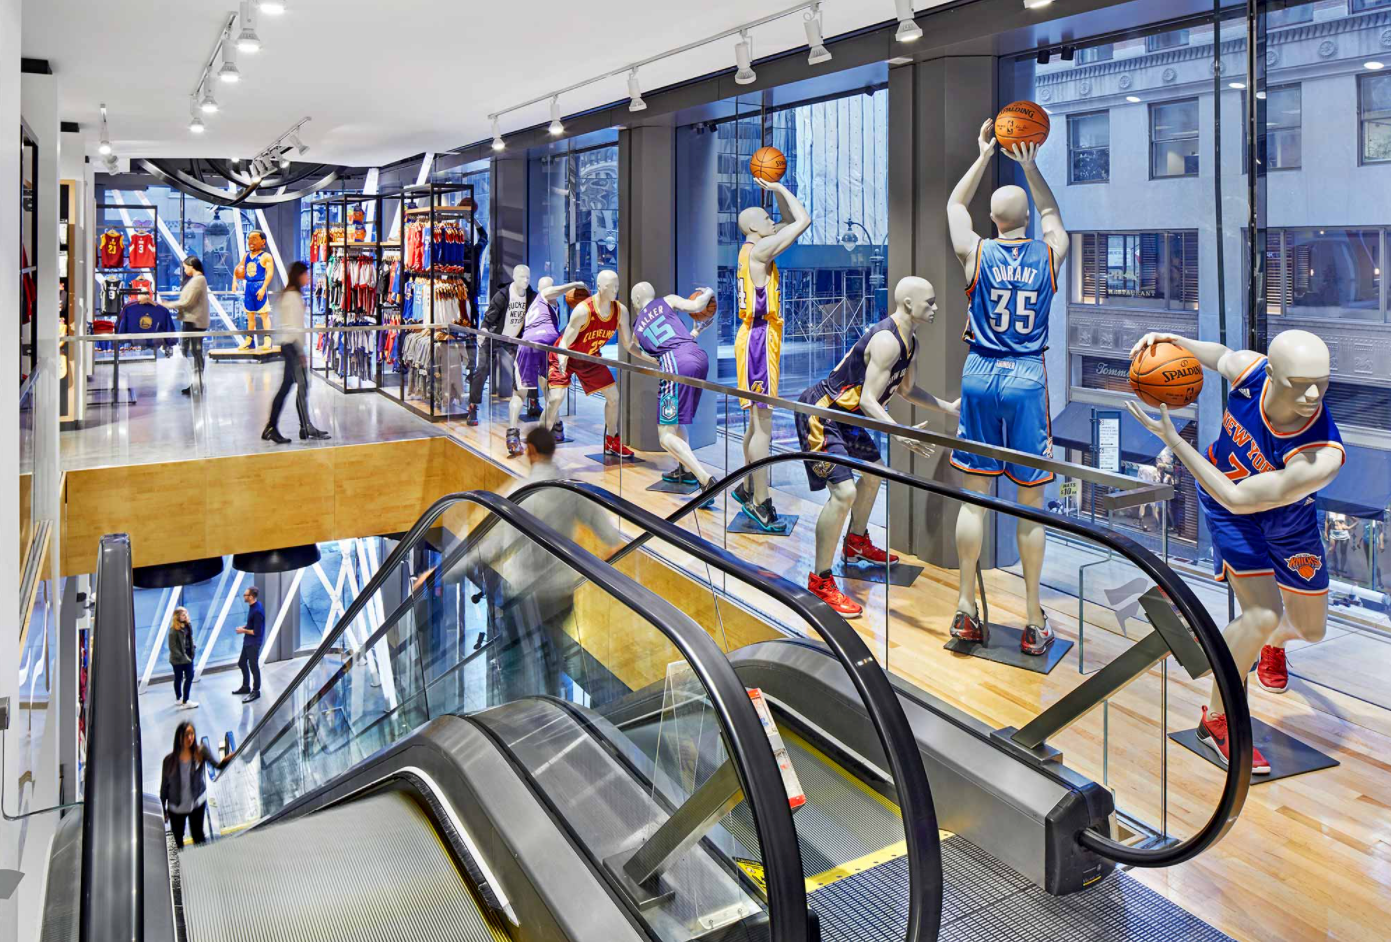 The NBA opens its first Store in London - Perfect Sourcing